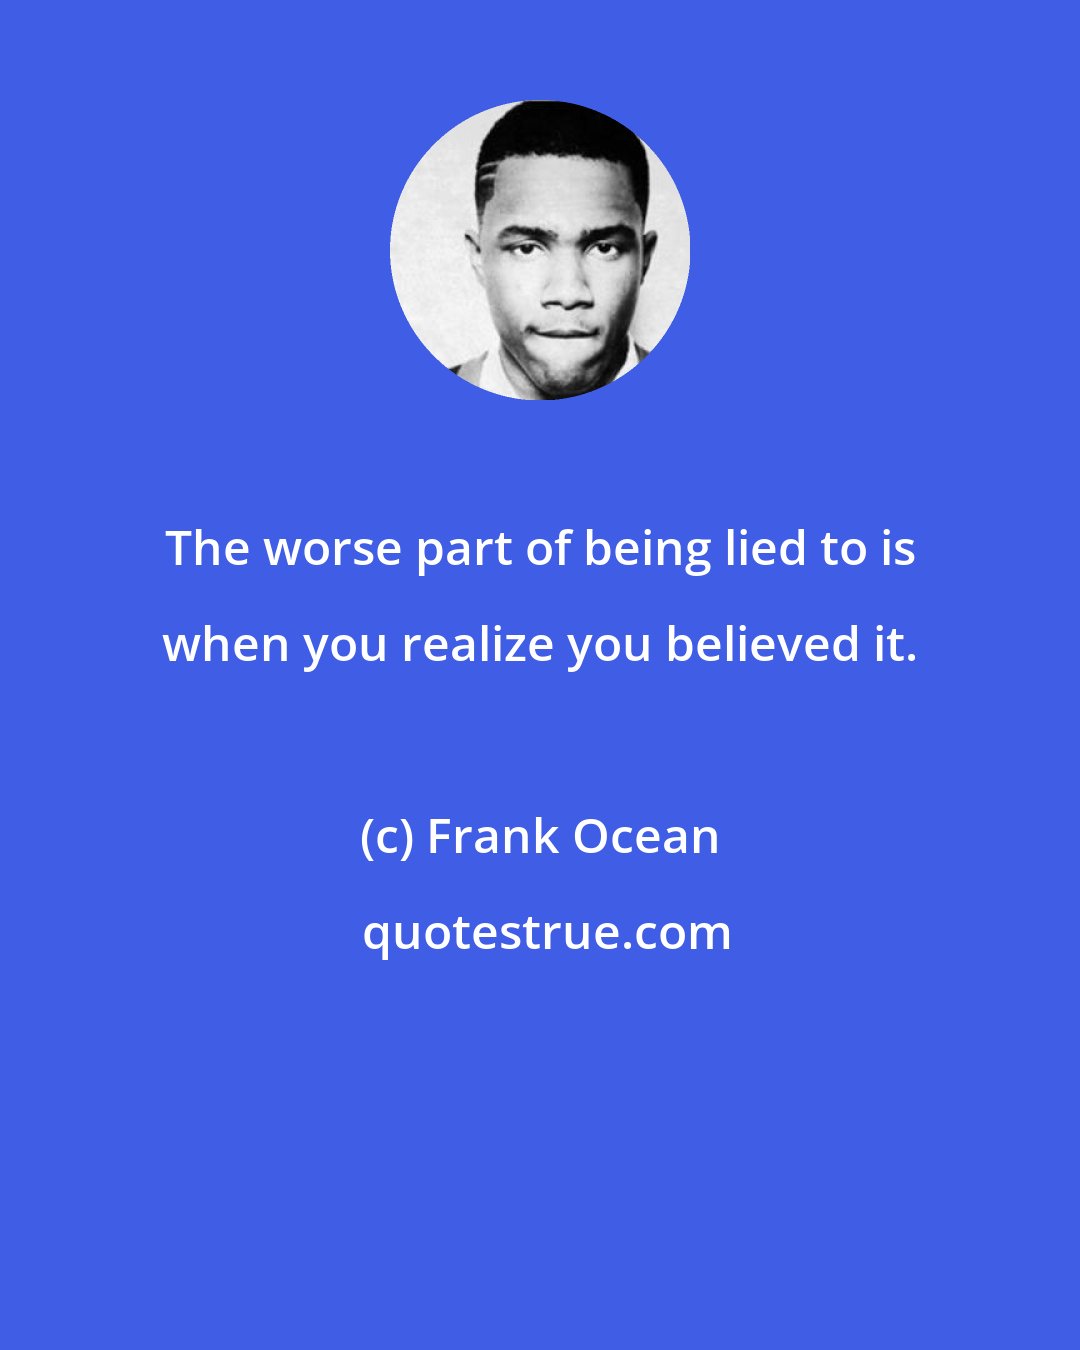 Frank Ocean: The worse part of being lied to is when you realize you believed it.